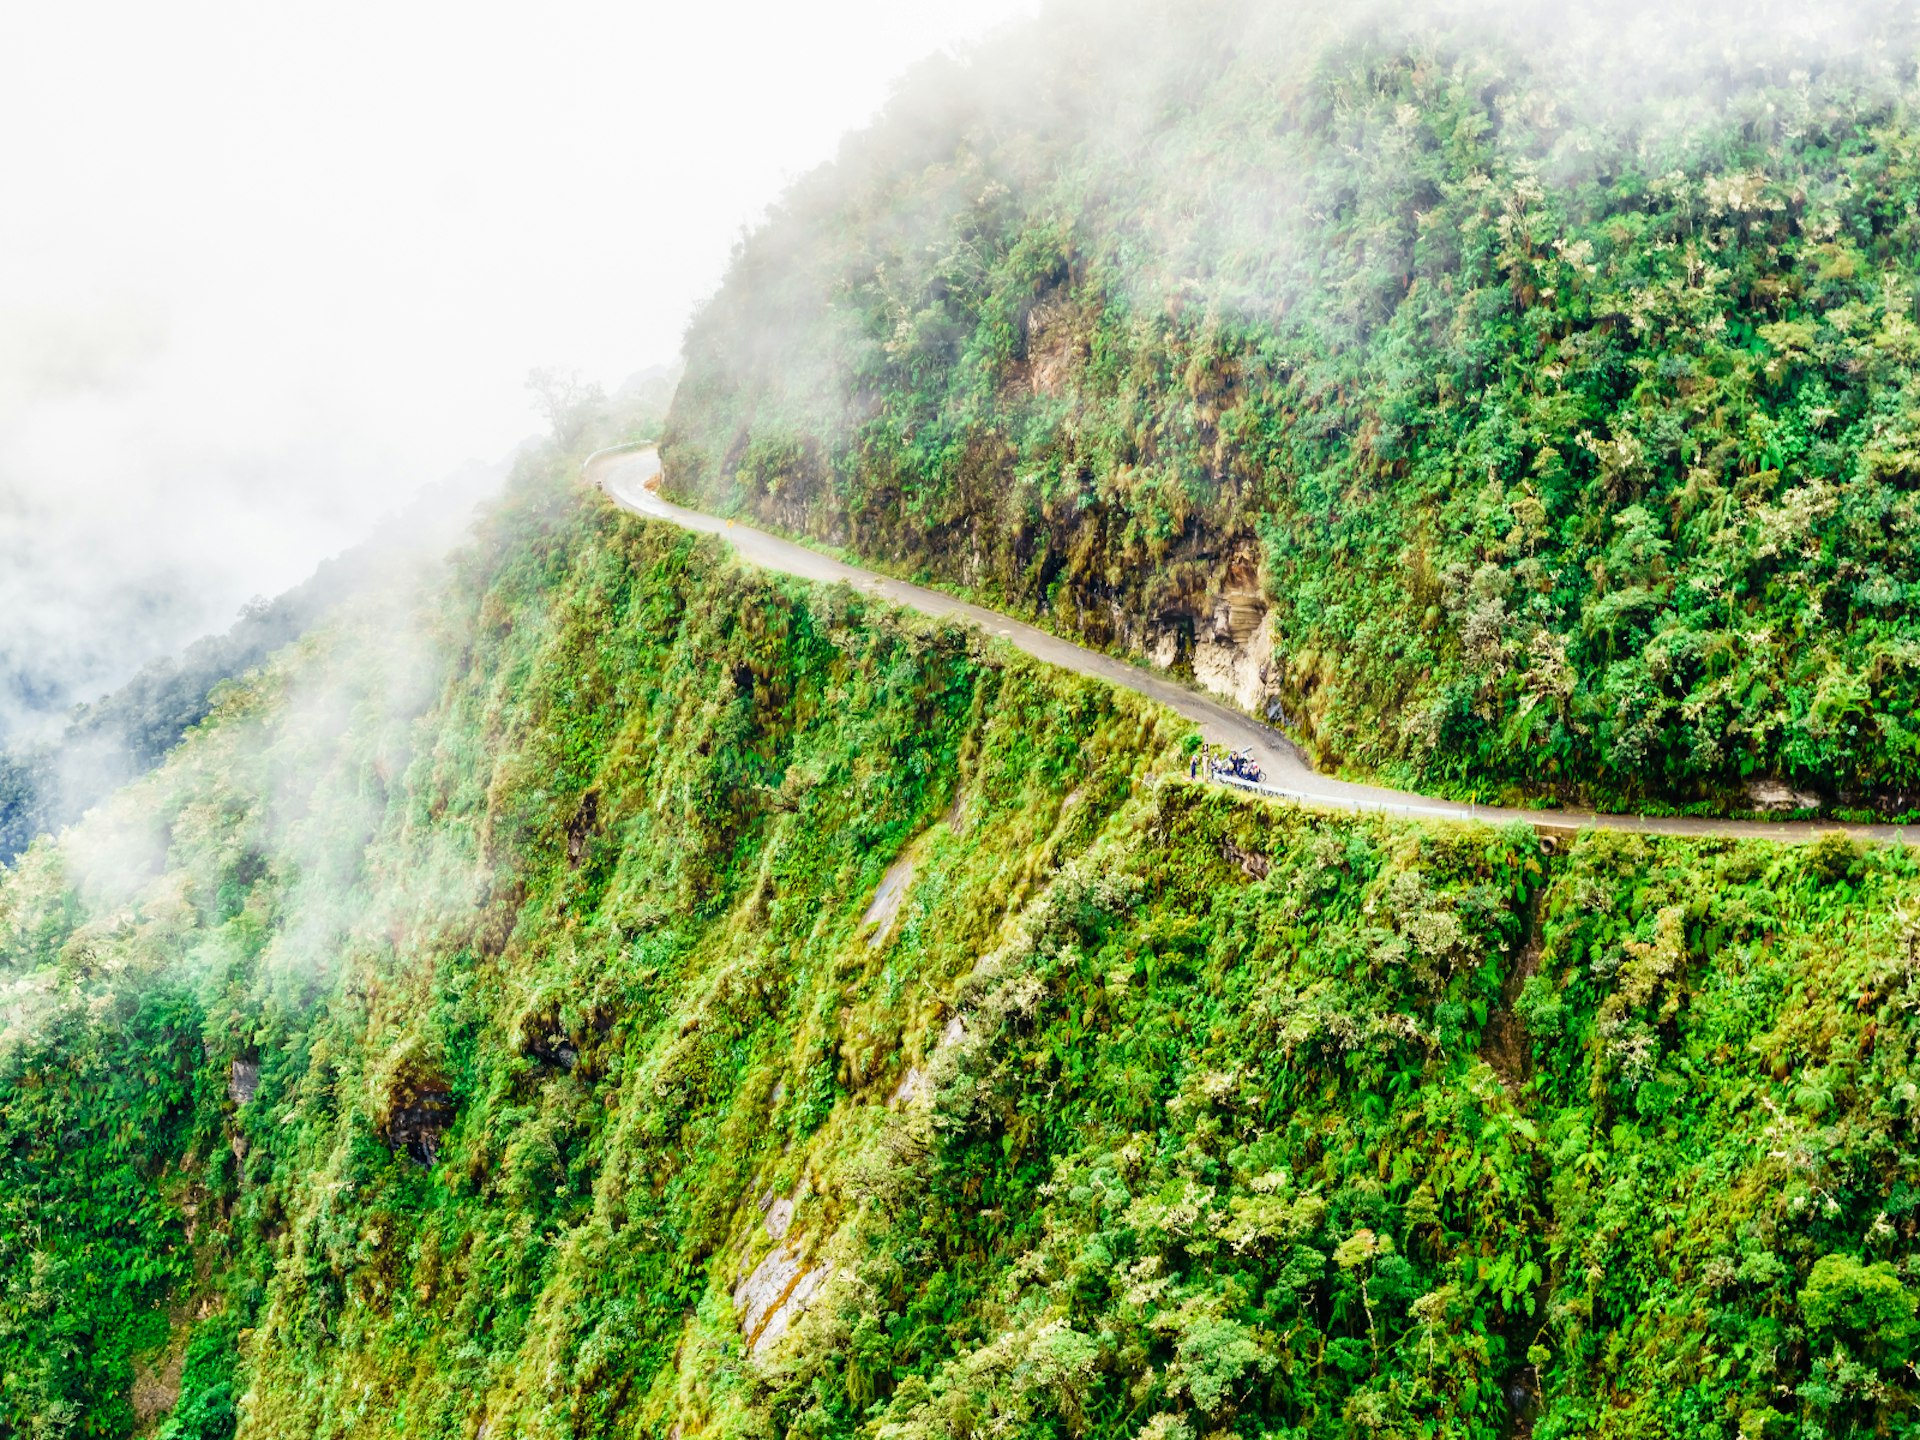 Mist rising over Bolivia's infamous Death Road © streetflash / Shutterstock